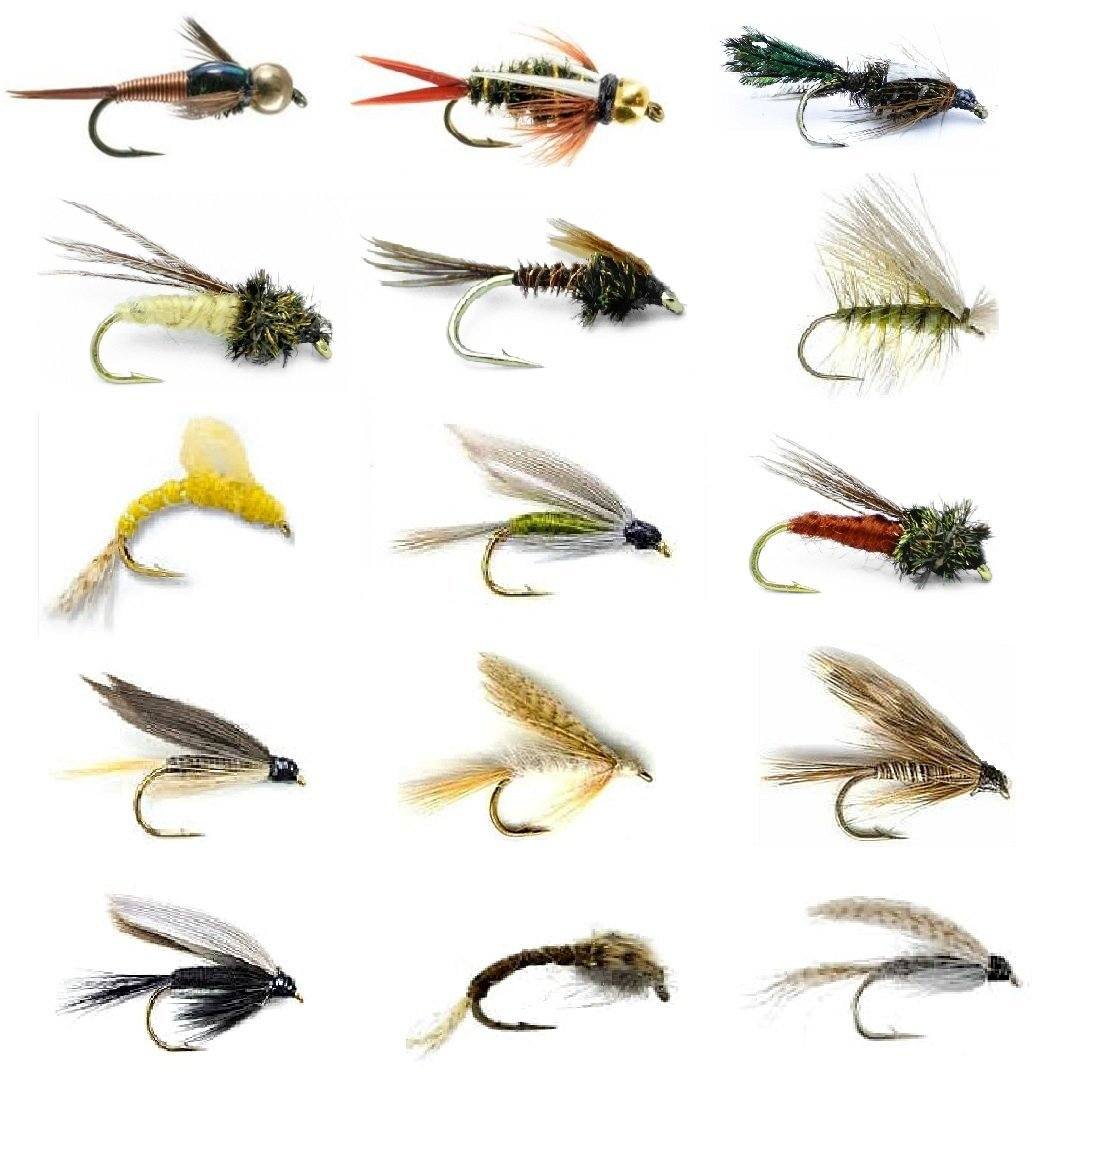 Fly Fishing Flies Assortment - Popular for Trout Fishing - 30 Wet Flies -  15 Patterns